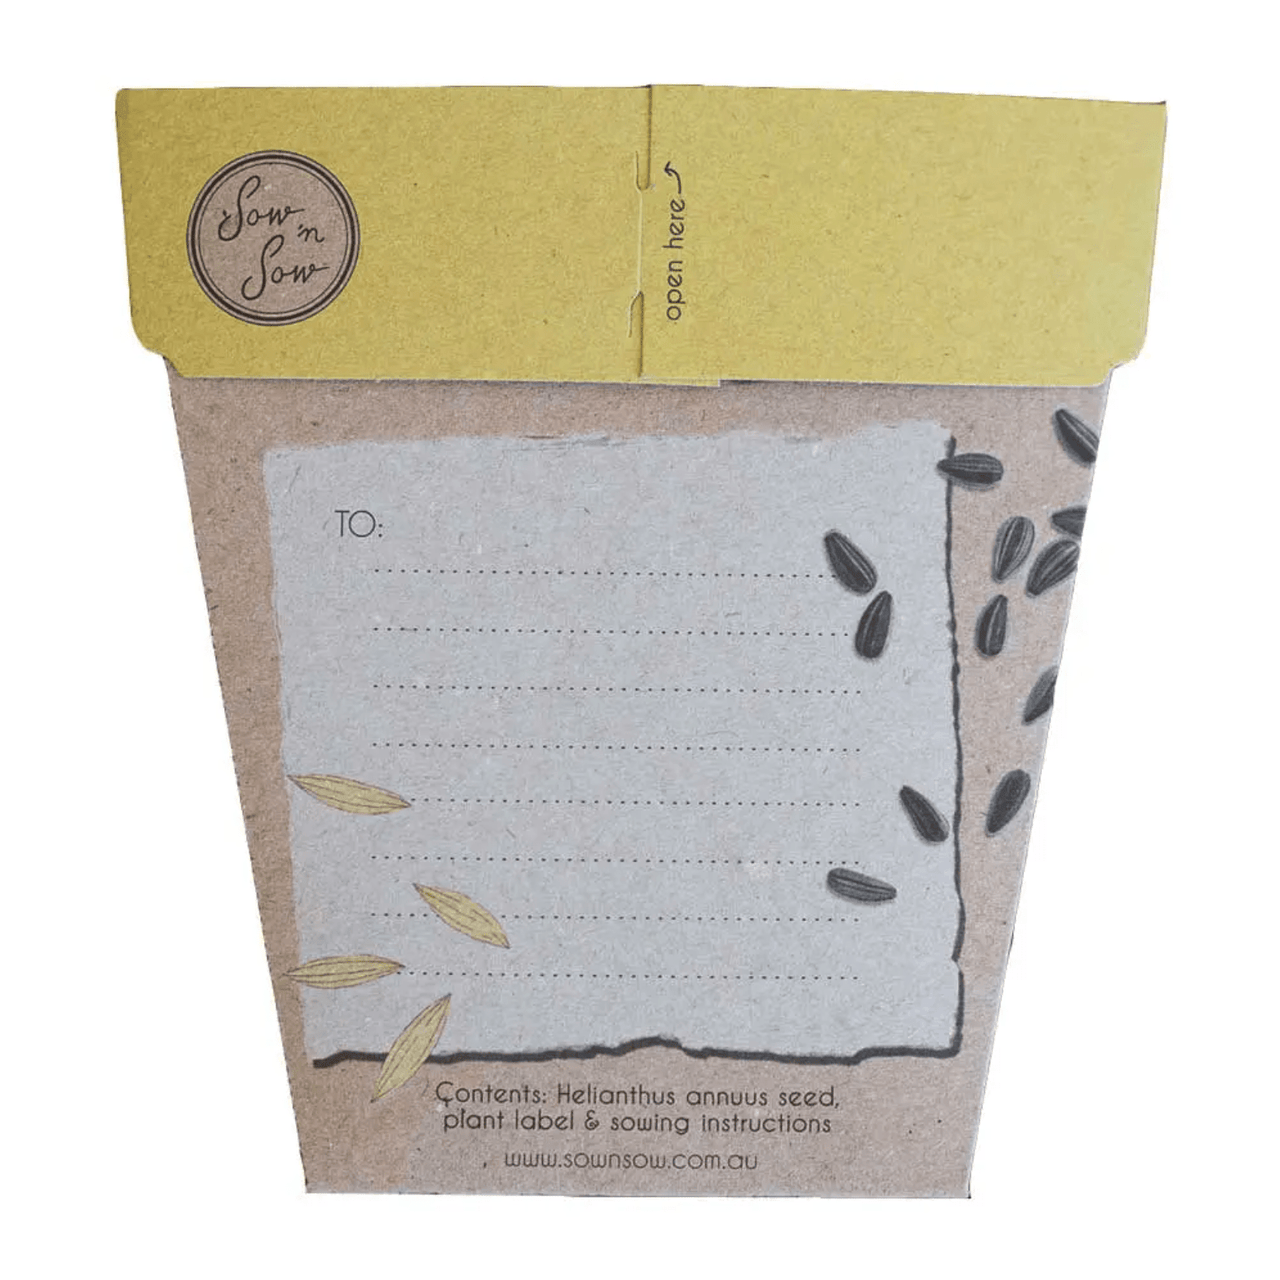 A yellow seed packet with a note inside featuring the Seeds - Sunflower from Sow n Sow.